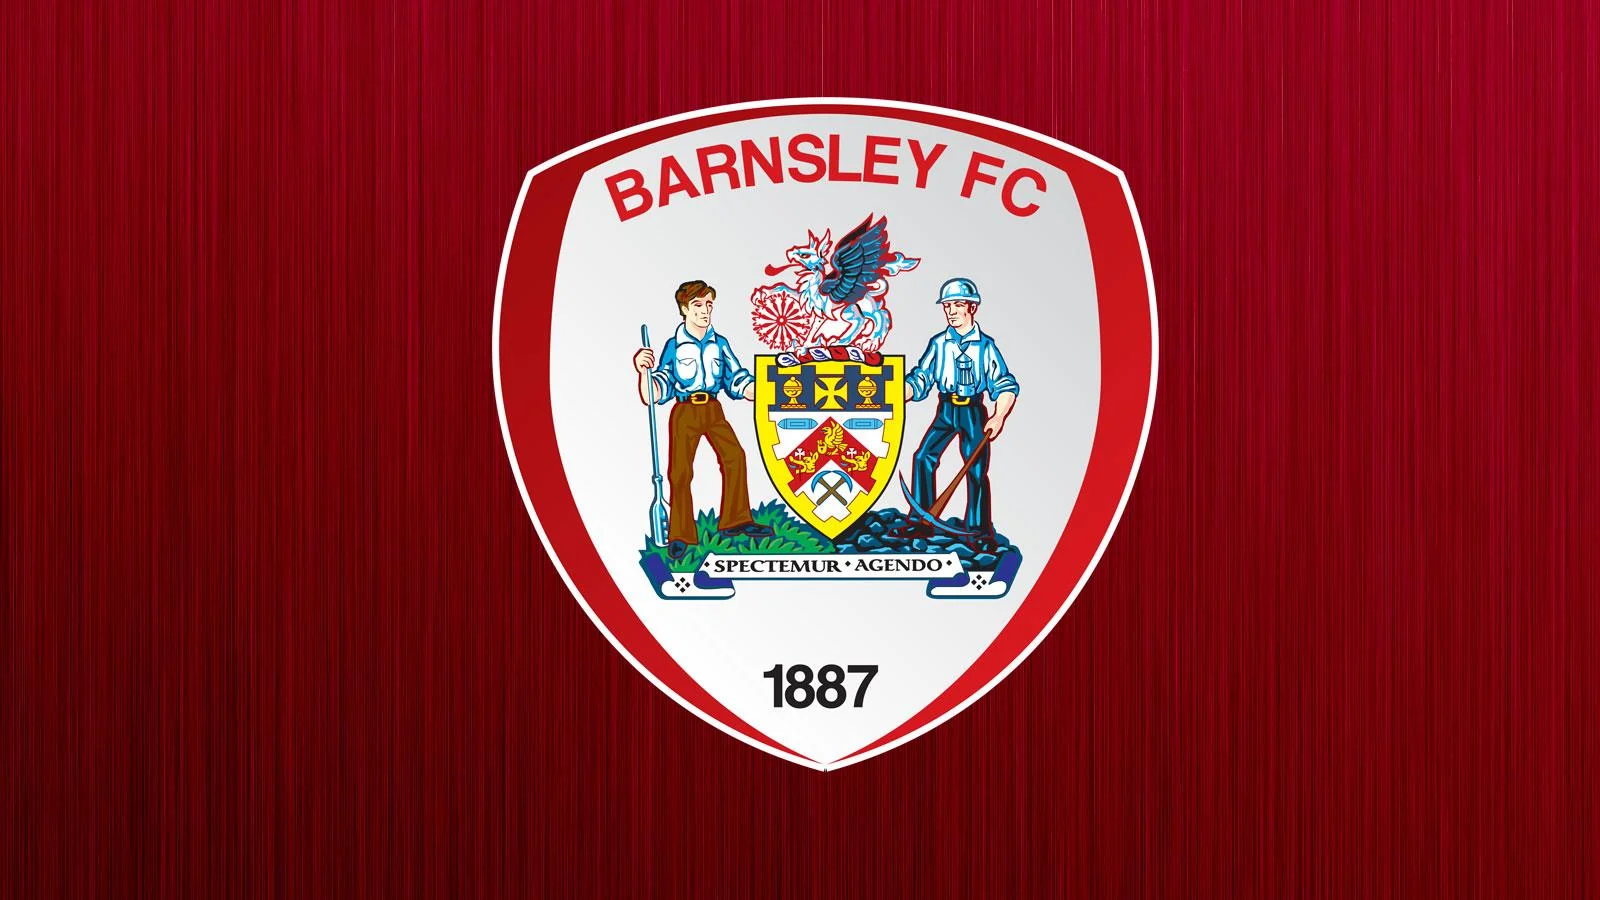 Barnsley Squad, Players, Stadium, Kits, and much more